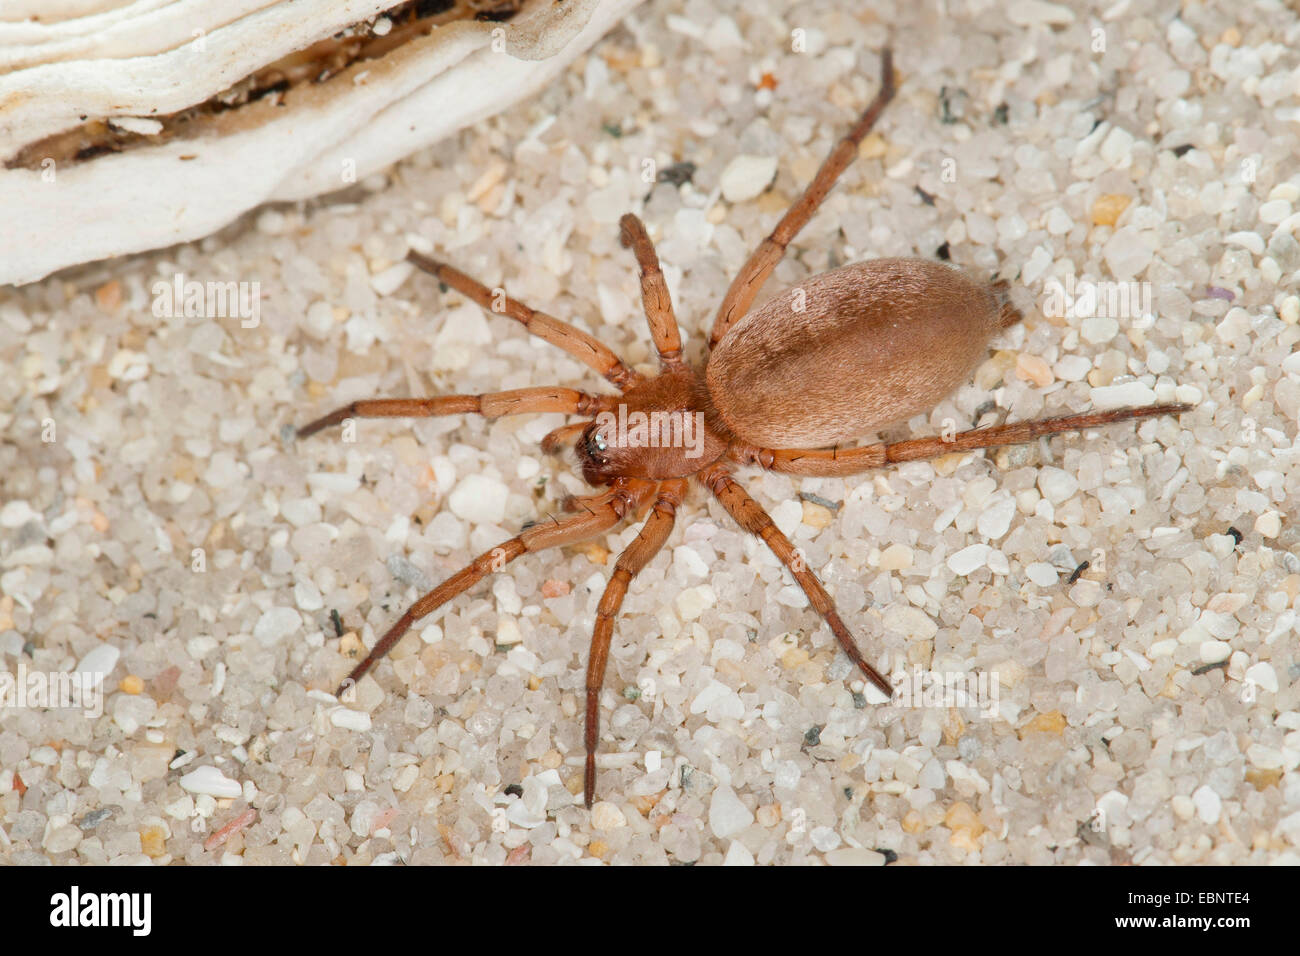 Stone spider, Mouse Spider, Ground spider (Drassodes cf. lapidosus), on pale sand, Germany Stock Photo